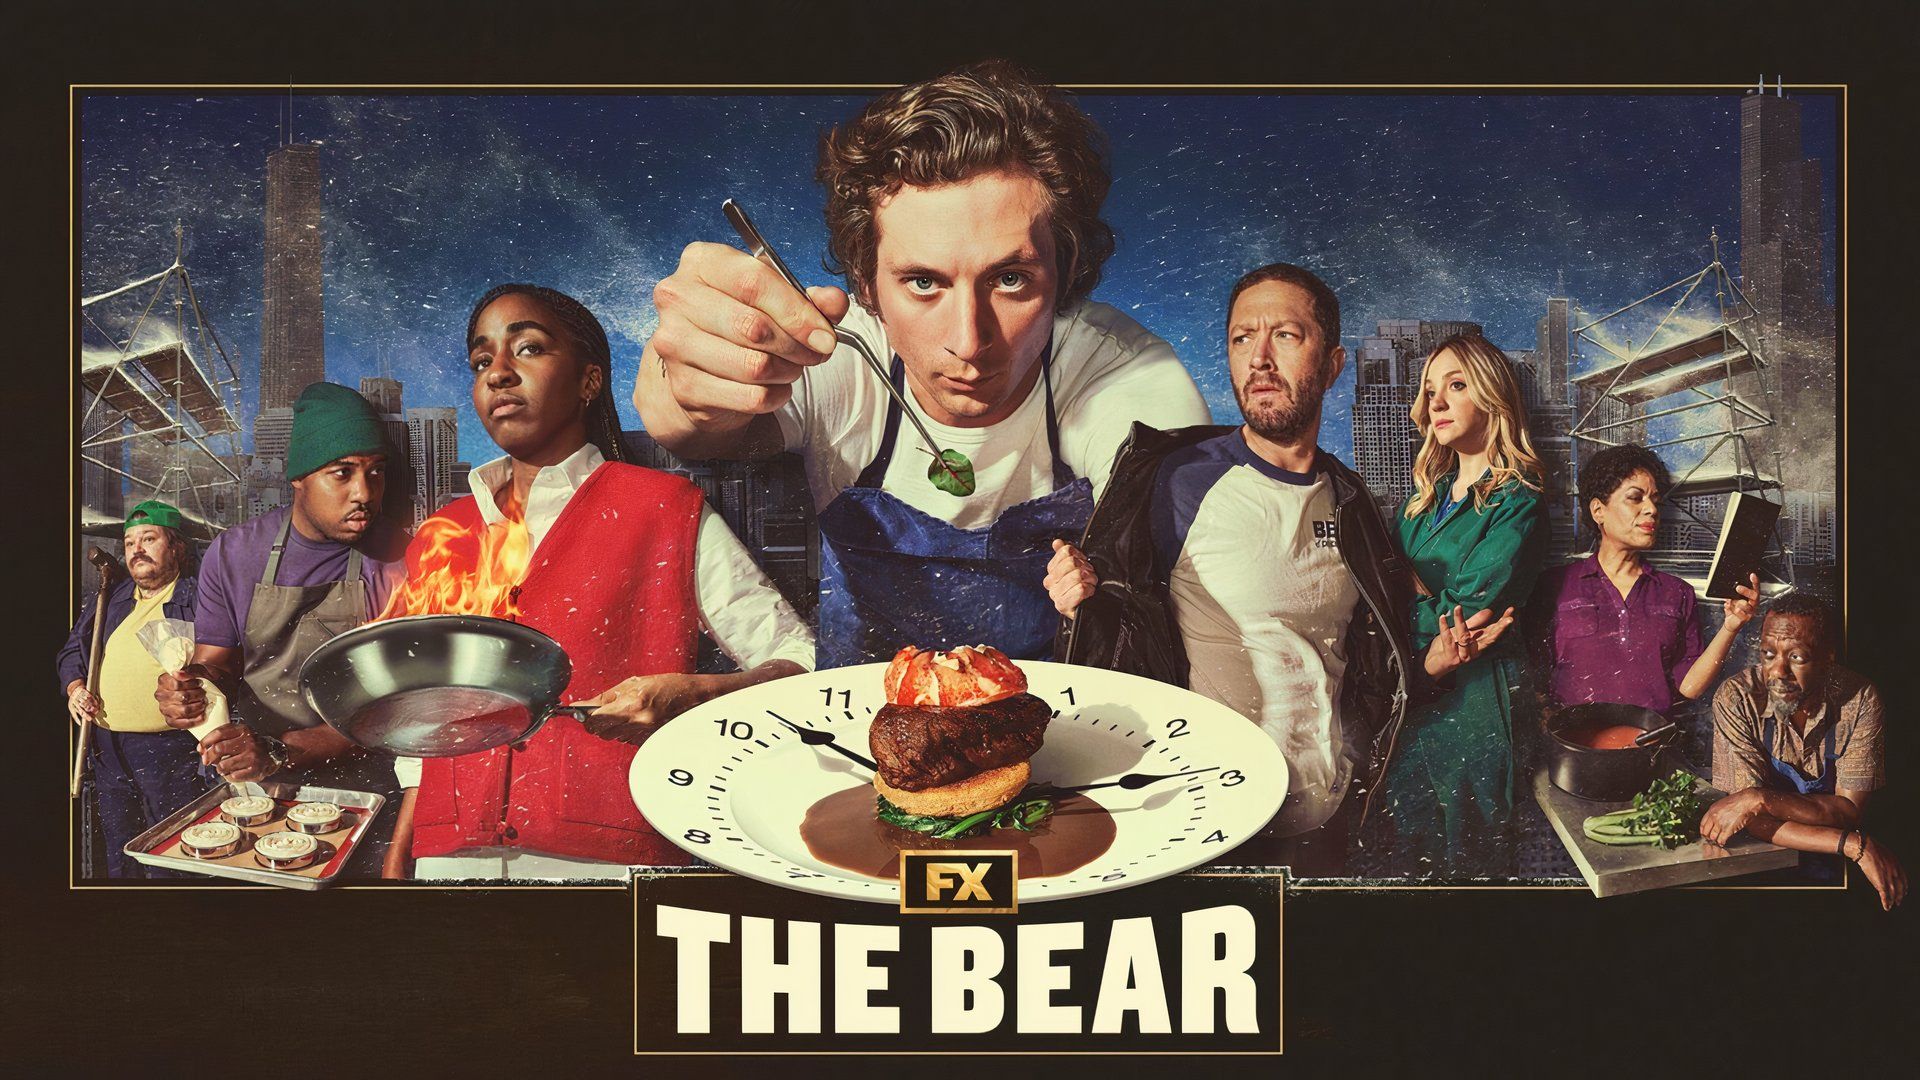 The cast of The Bear on FX with Jeremy Allen White in the center